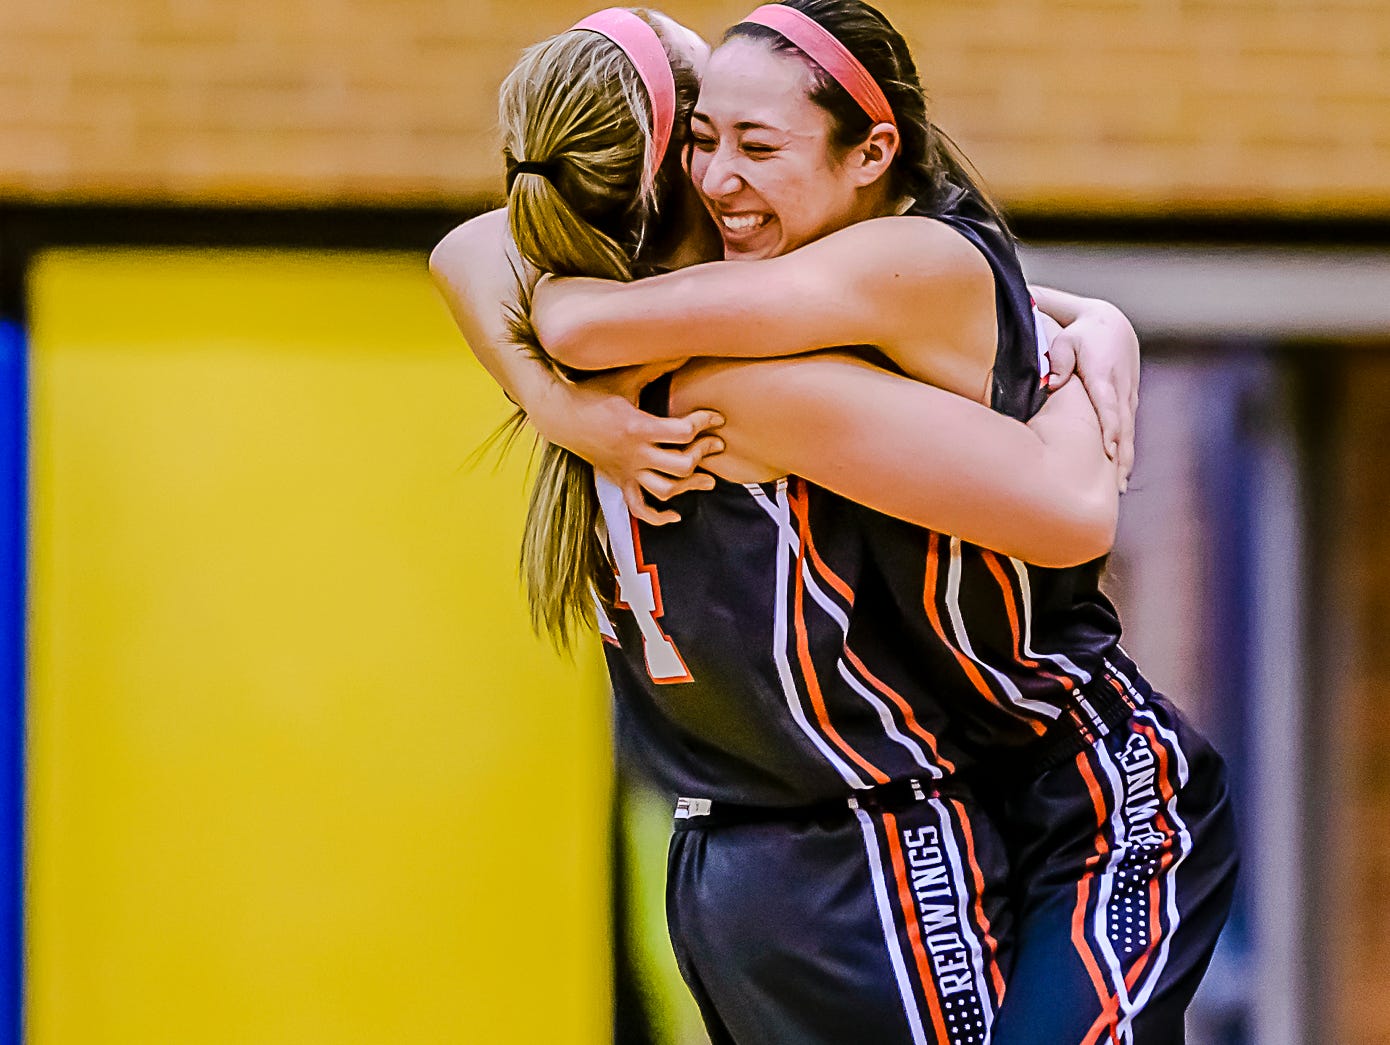 Erika Ballinger ,right, and Brooke Mazzolini of St. Johns hug after their Class A regional final win over Saginaw Heritage Thursday March 10, 2016 at Midland High in Midland. KEVIN W. FOWLER PHOTO